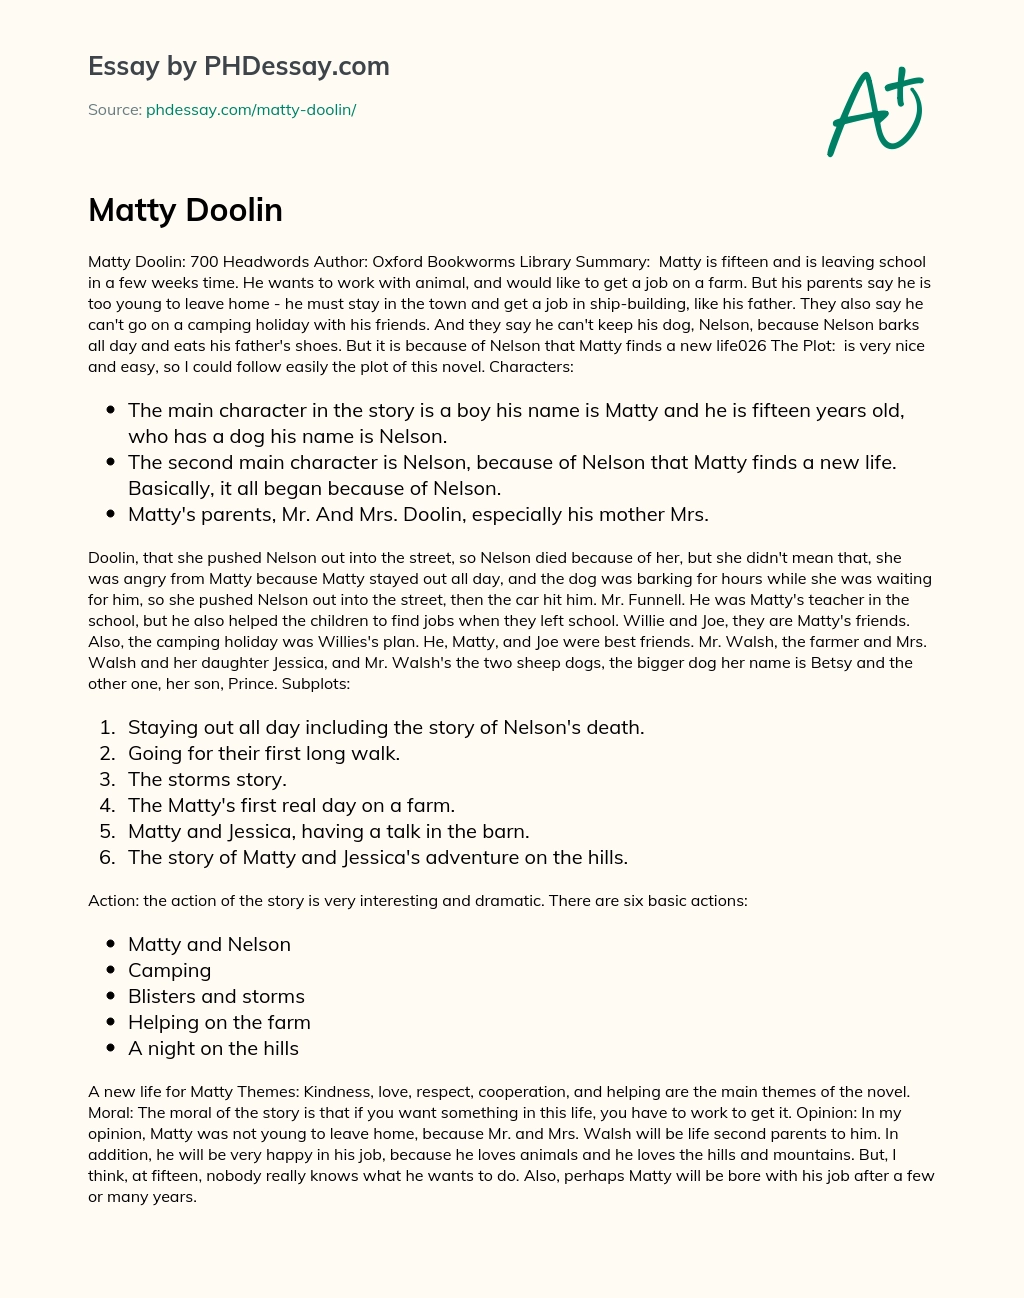 700 Headwords Author: Matty Doolin’s Journey to a New Life with Nelson essay